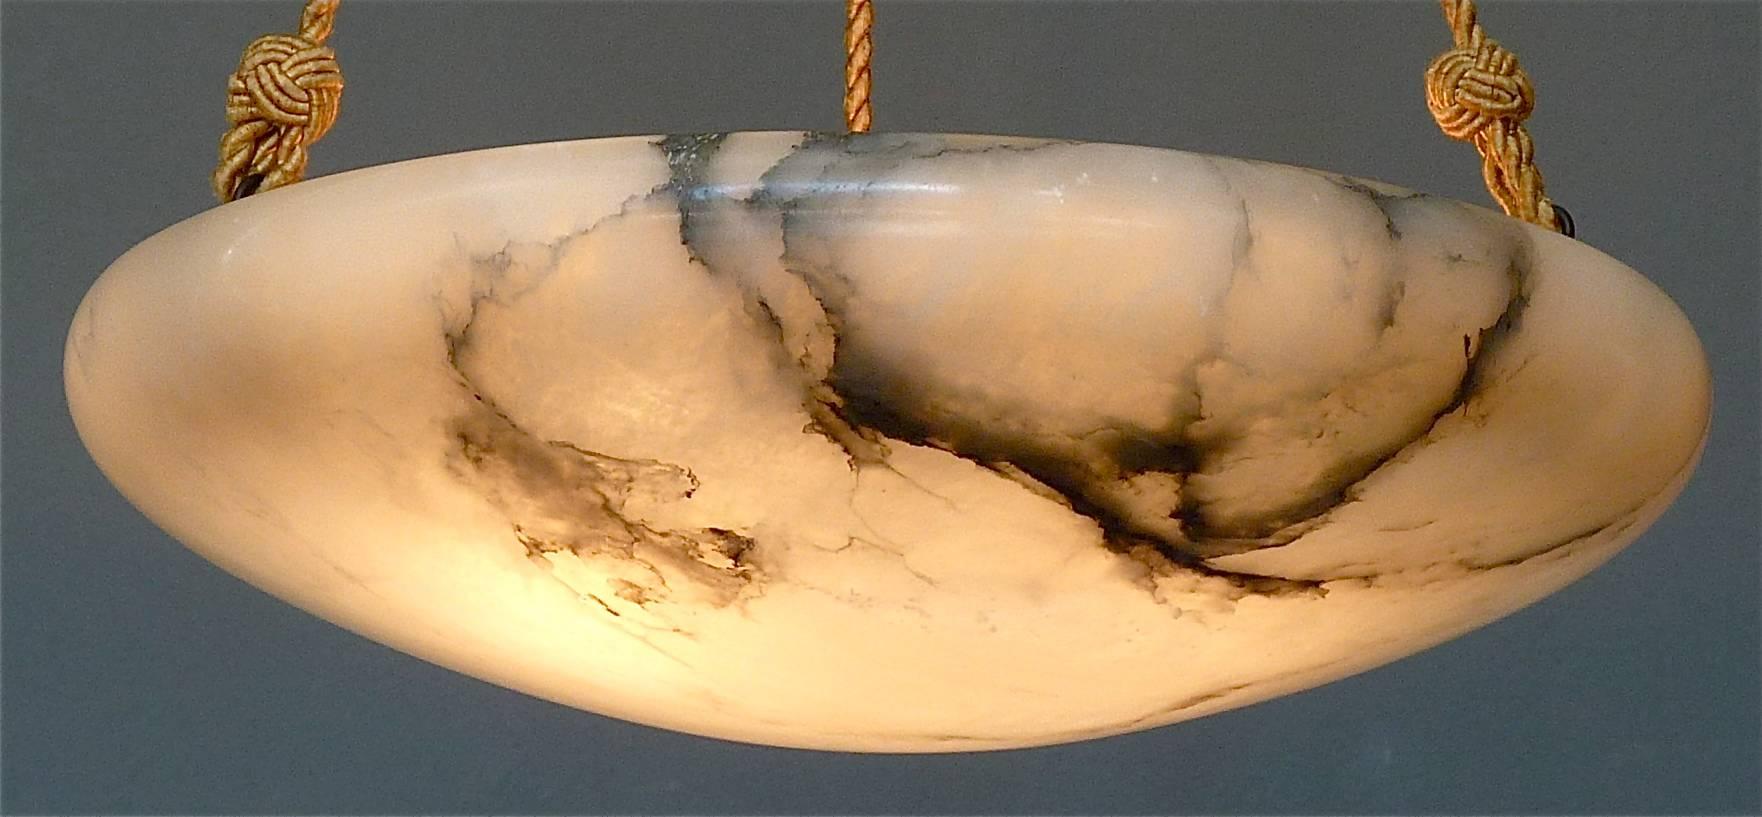 Beautiful classical and large French carved creamy white alabaster chandelier or light fixture with charcoal mineral veining from the Art Nouveau or Art Deco period, circa 1900 to 1920s. The high quality dome pendant has three patinated brass and